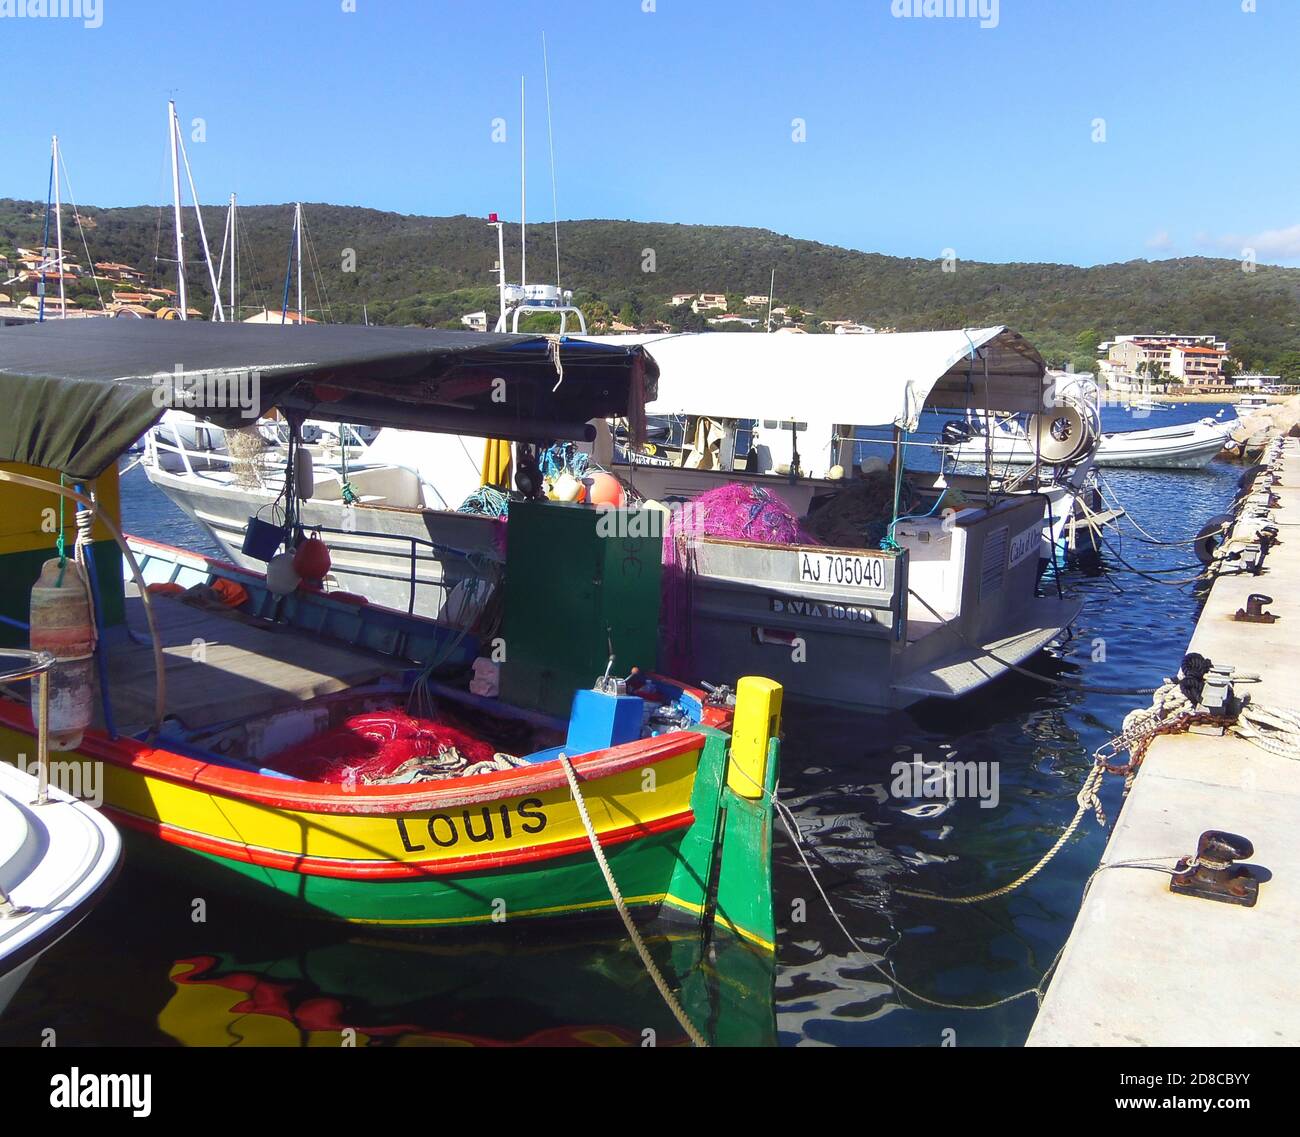 Brightly painted fishing boats anchored in the harbour of sleepy seaside village   Porto Pollo, Gulf of Valinco, Corsica France Stock Photo